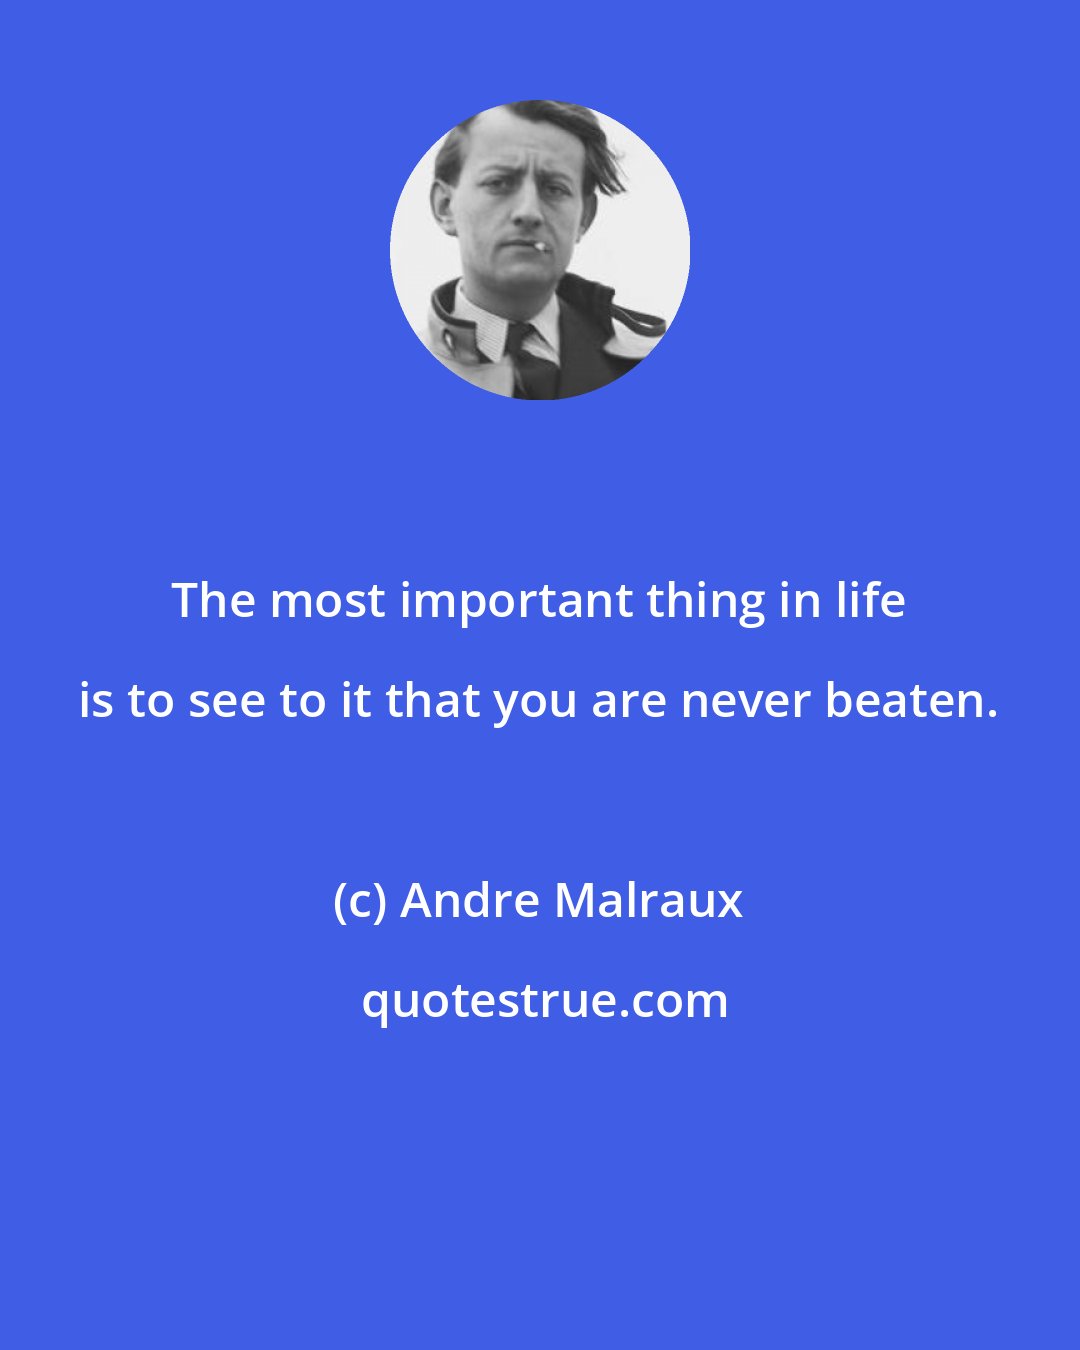 Andre Malraux: The most important thing in life is to see to it that you are never beaten.